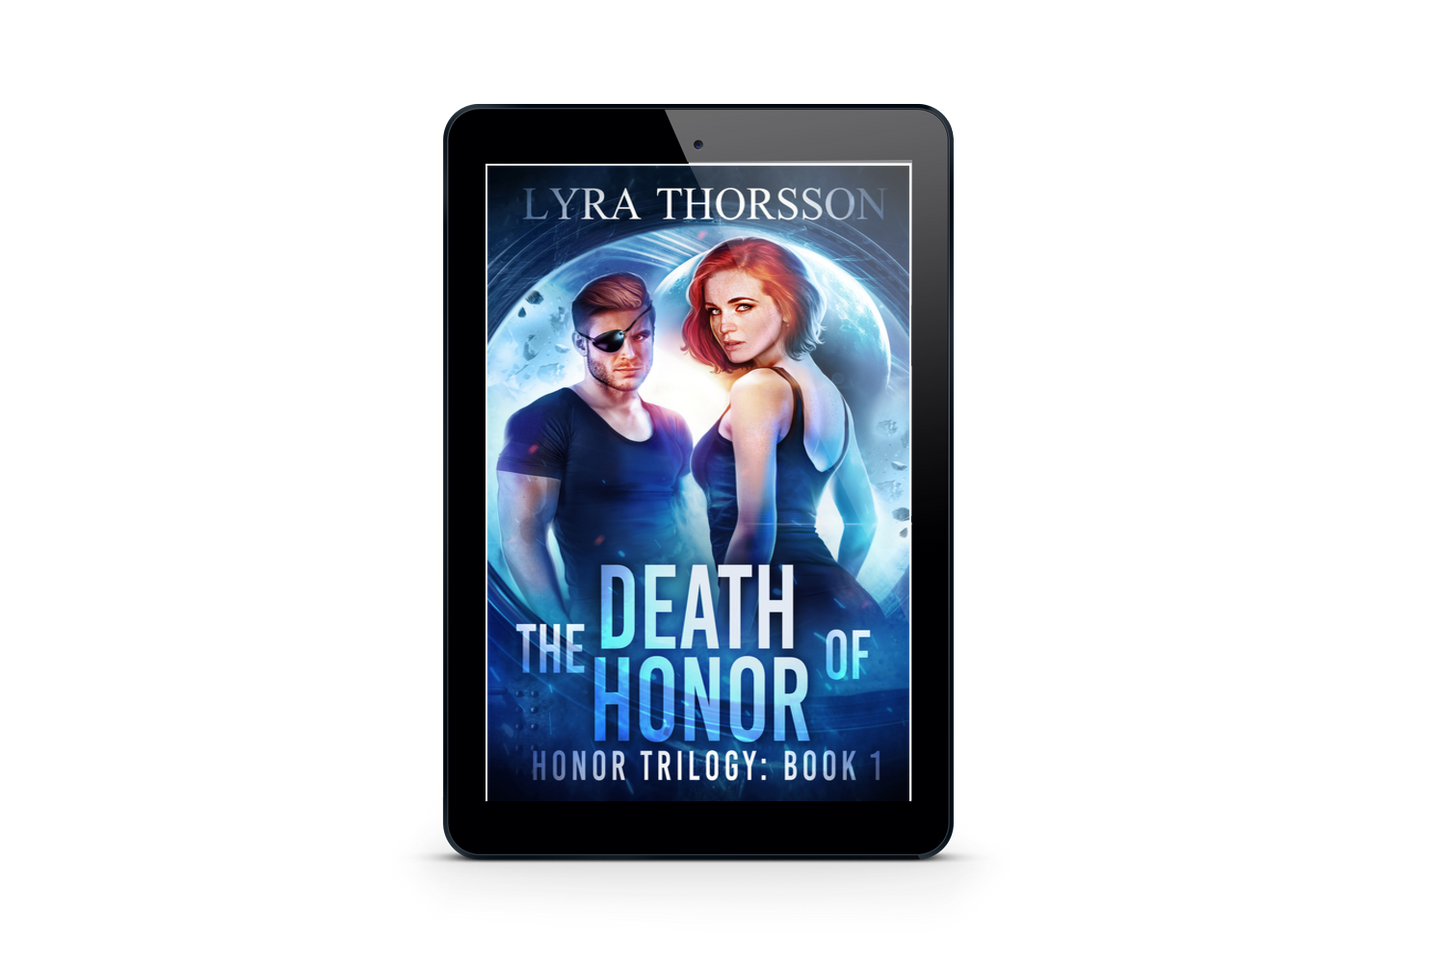 The Death of Honor (Honor Trilogy, Book 1) eBook